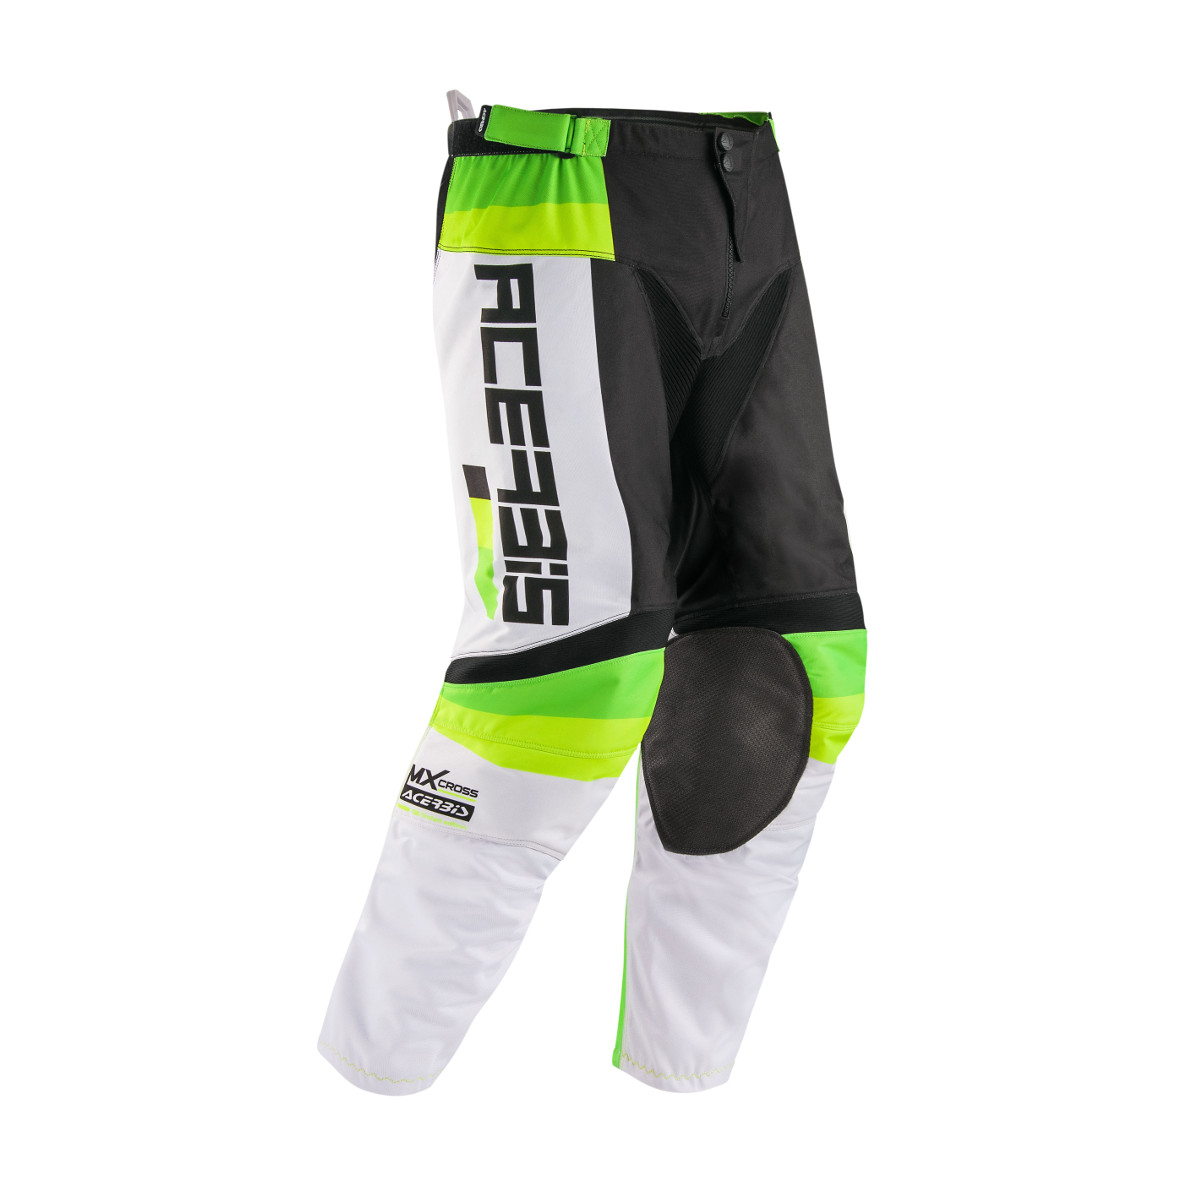 Acerbis MX Pants Limited Edition Spacelord - Black/Green